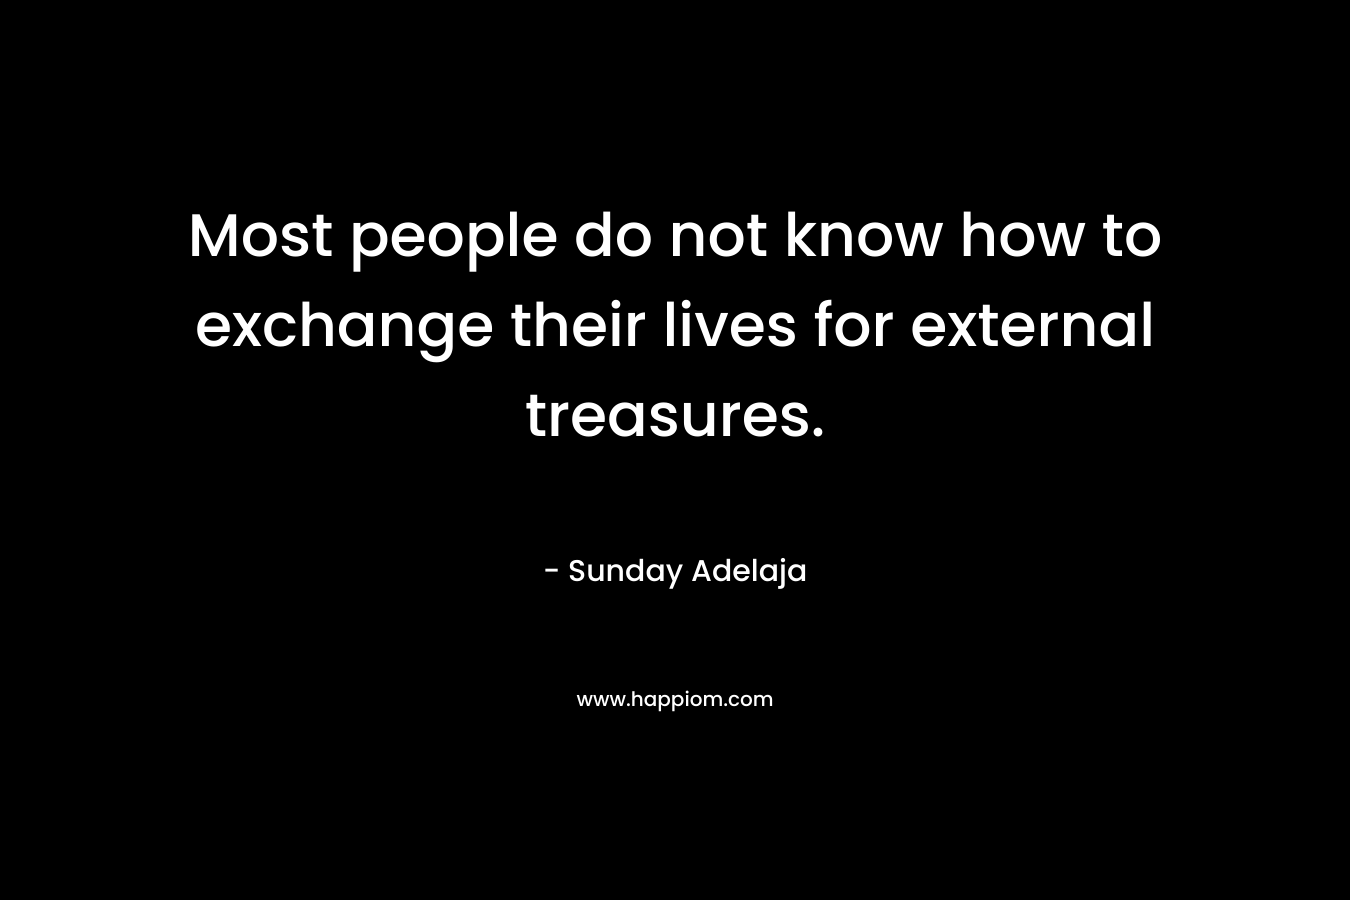 Most people do not know how to exchange their lives for external treasures.